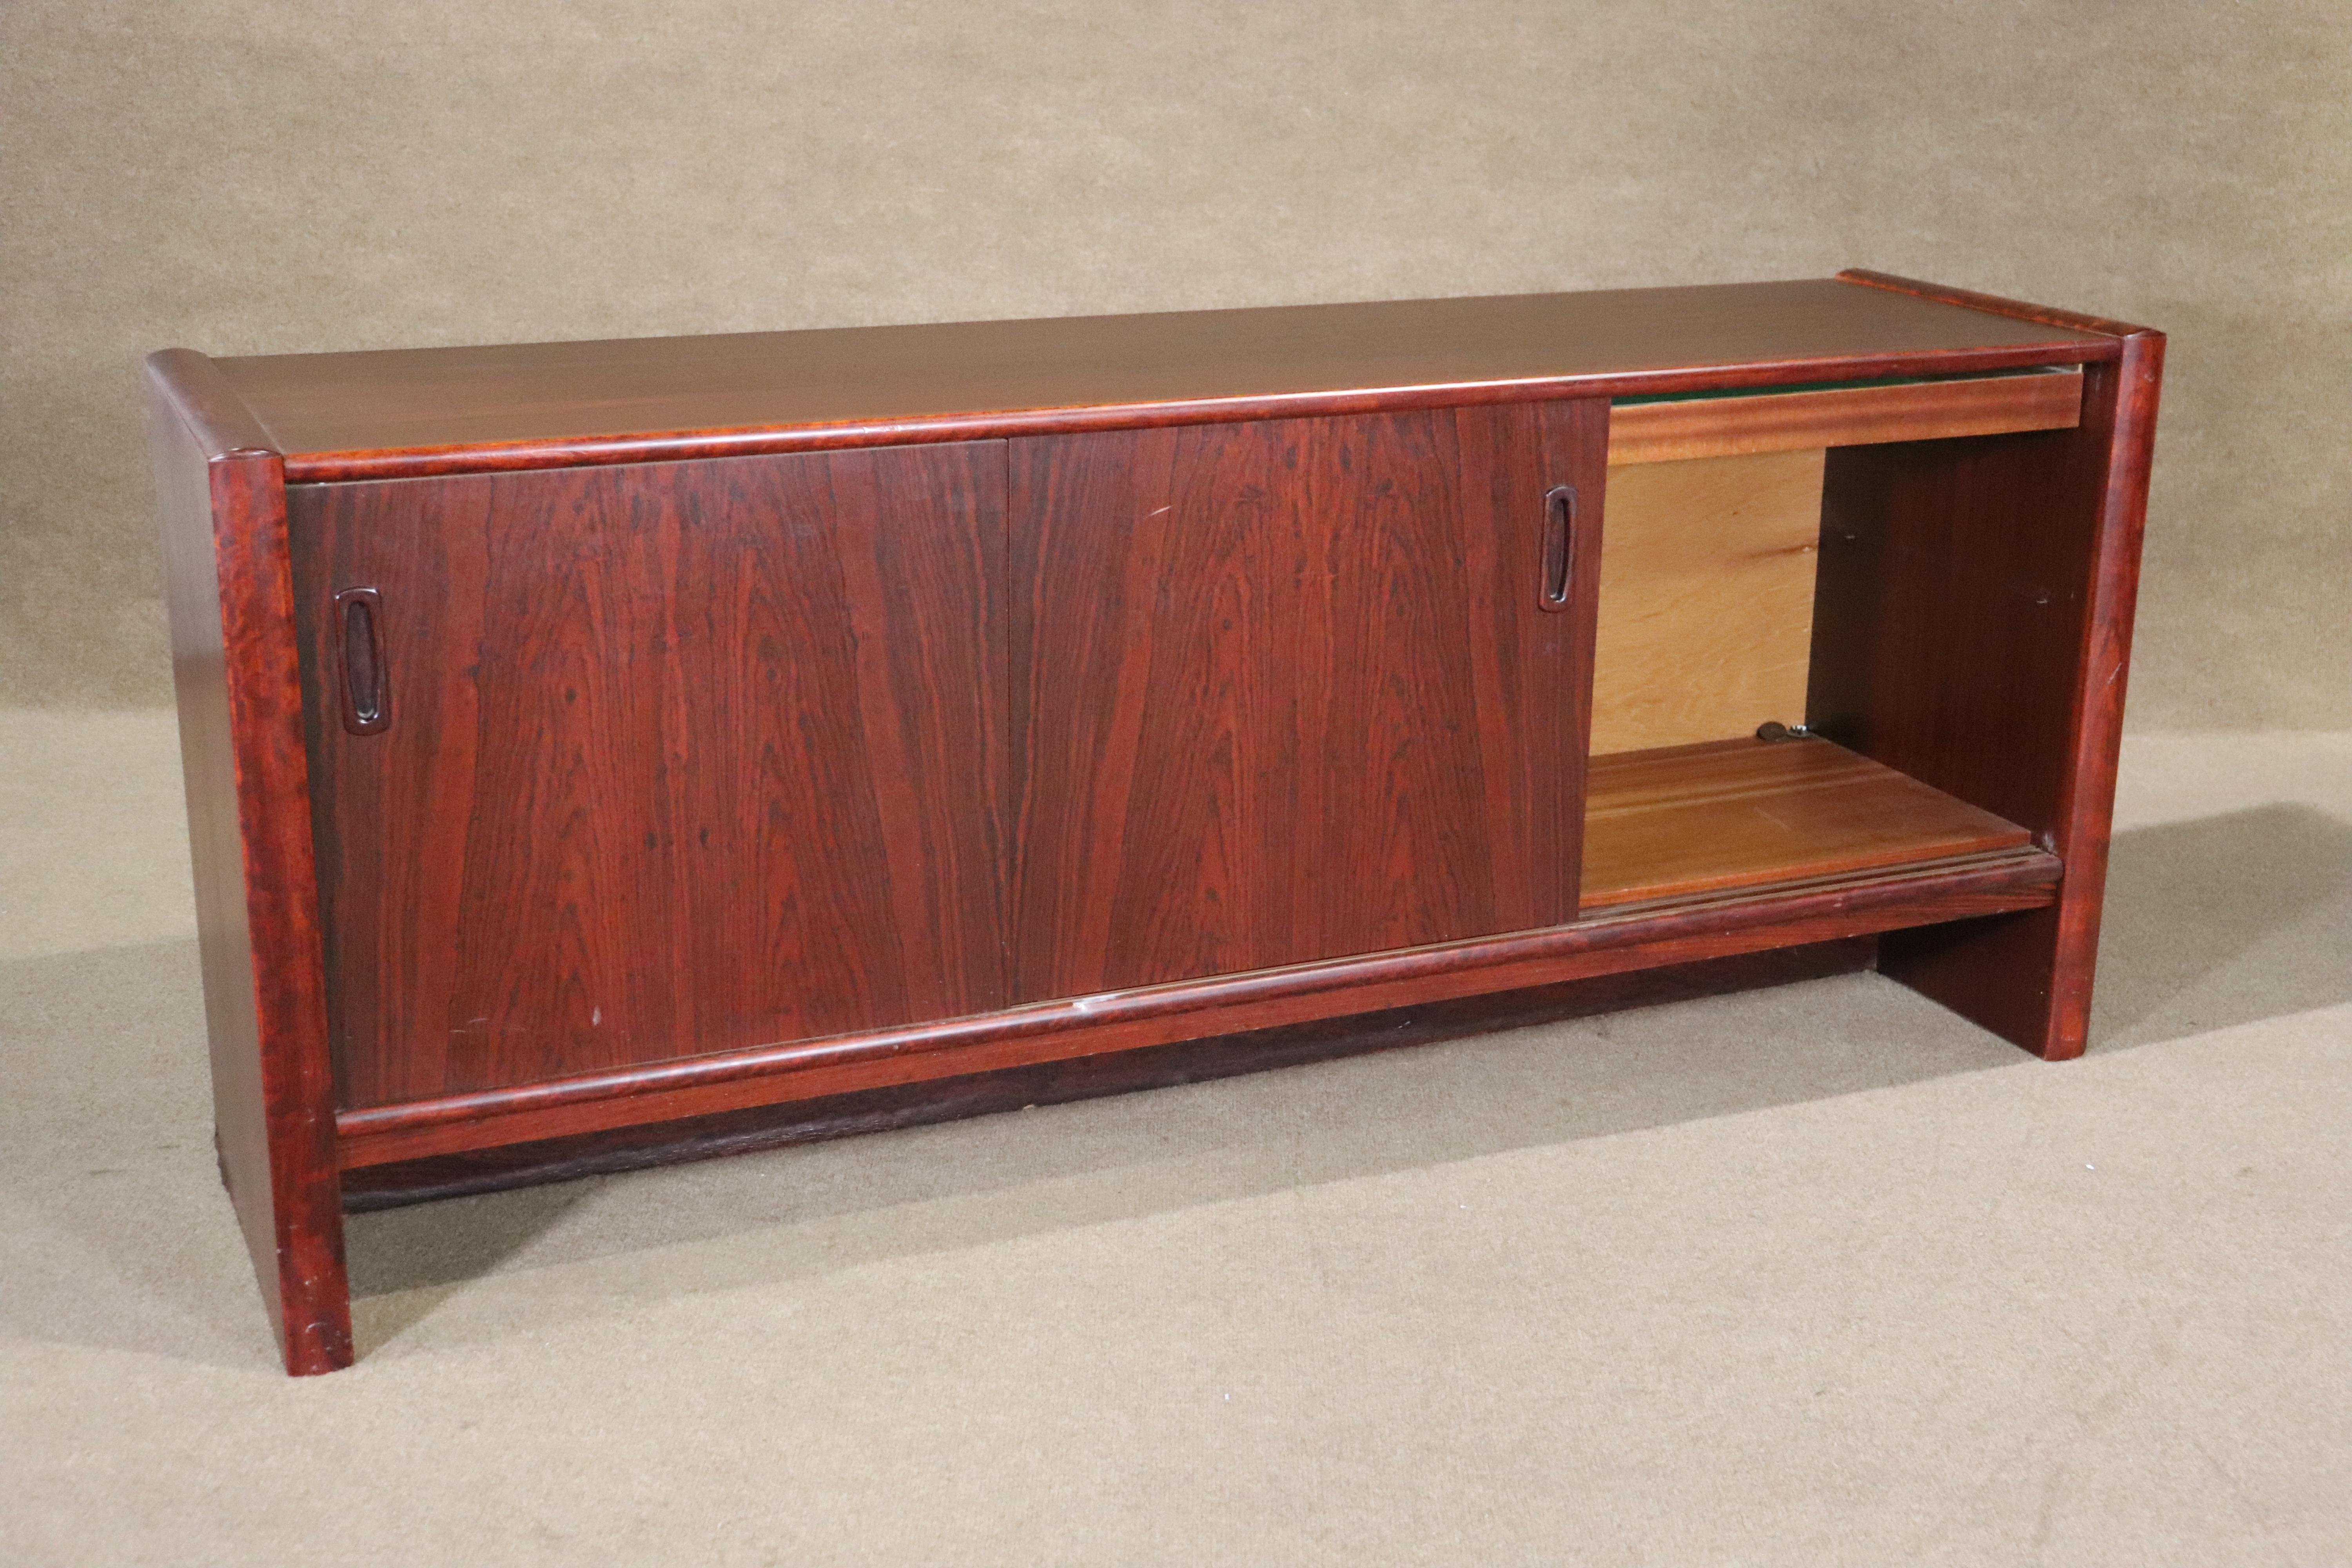 Long mid-century modern credenza with sliding doors. Open cabinet storage with shelf capability.
Please confirm location NY or NJ